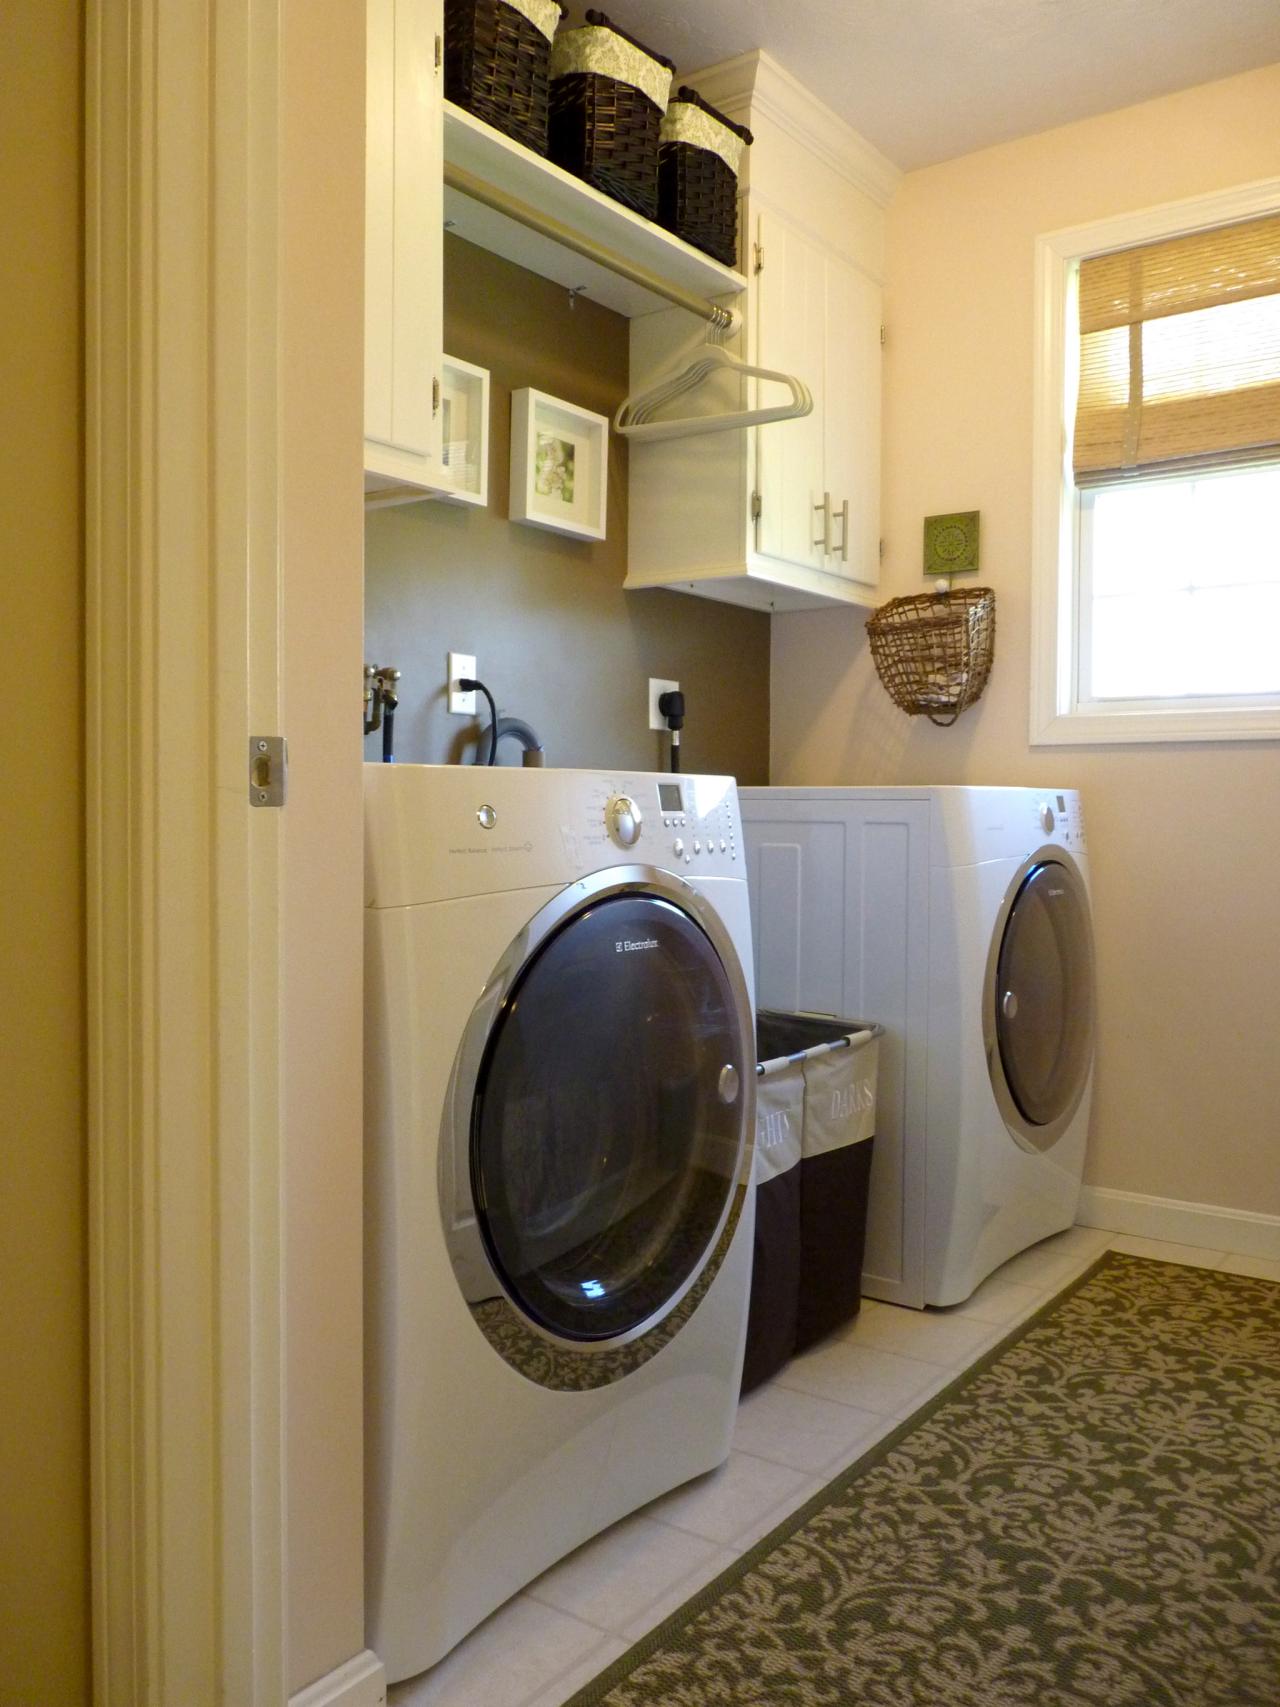 10 Clever Storage Ideas for Your Tiny Laundry Room | HGTV's Decorating ...